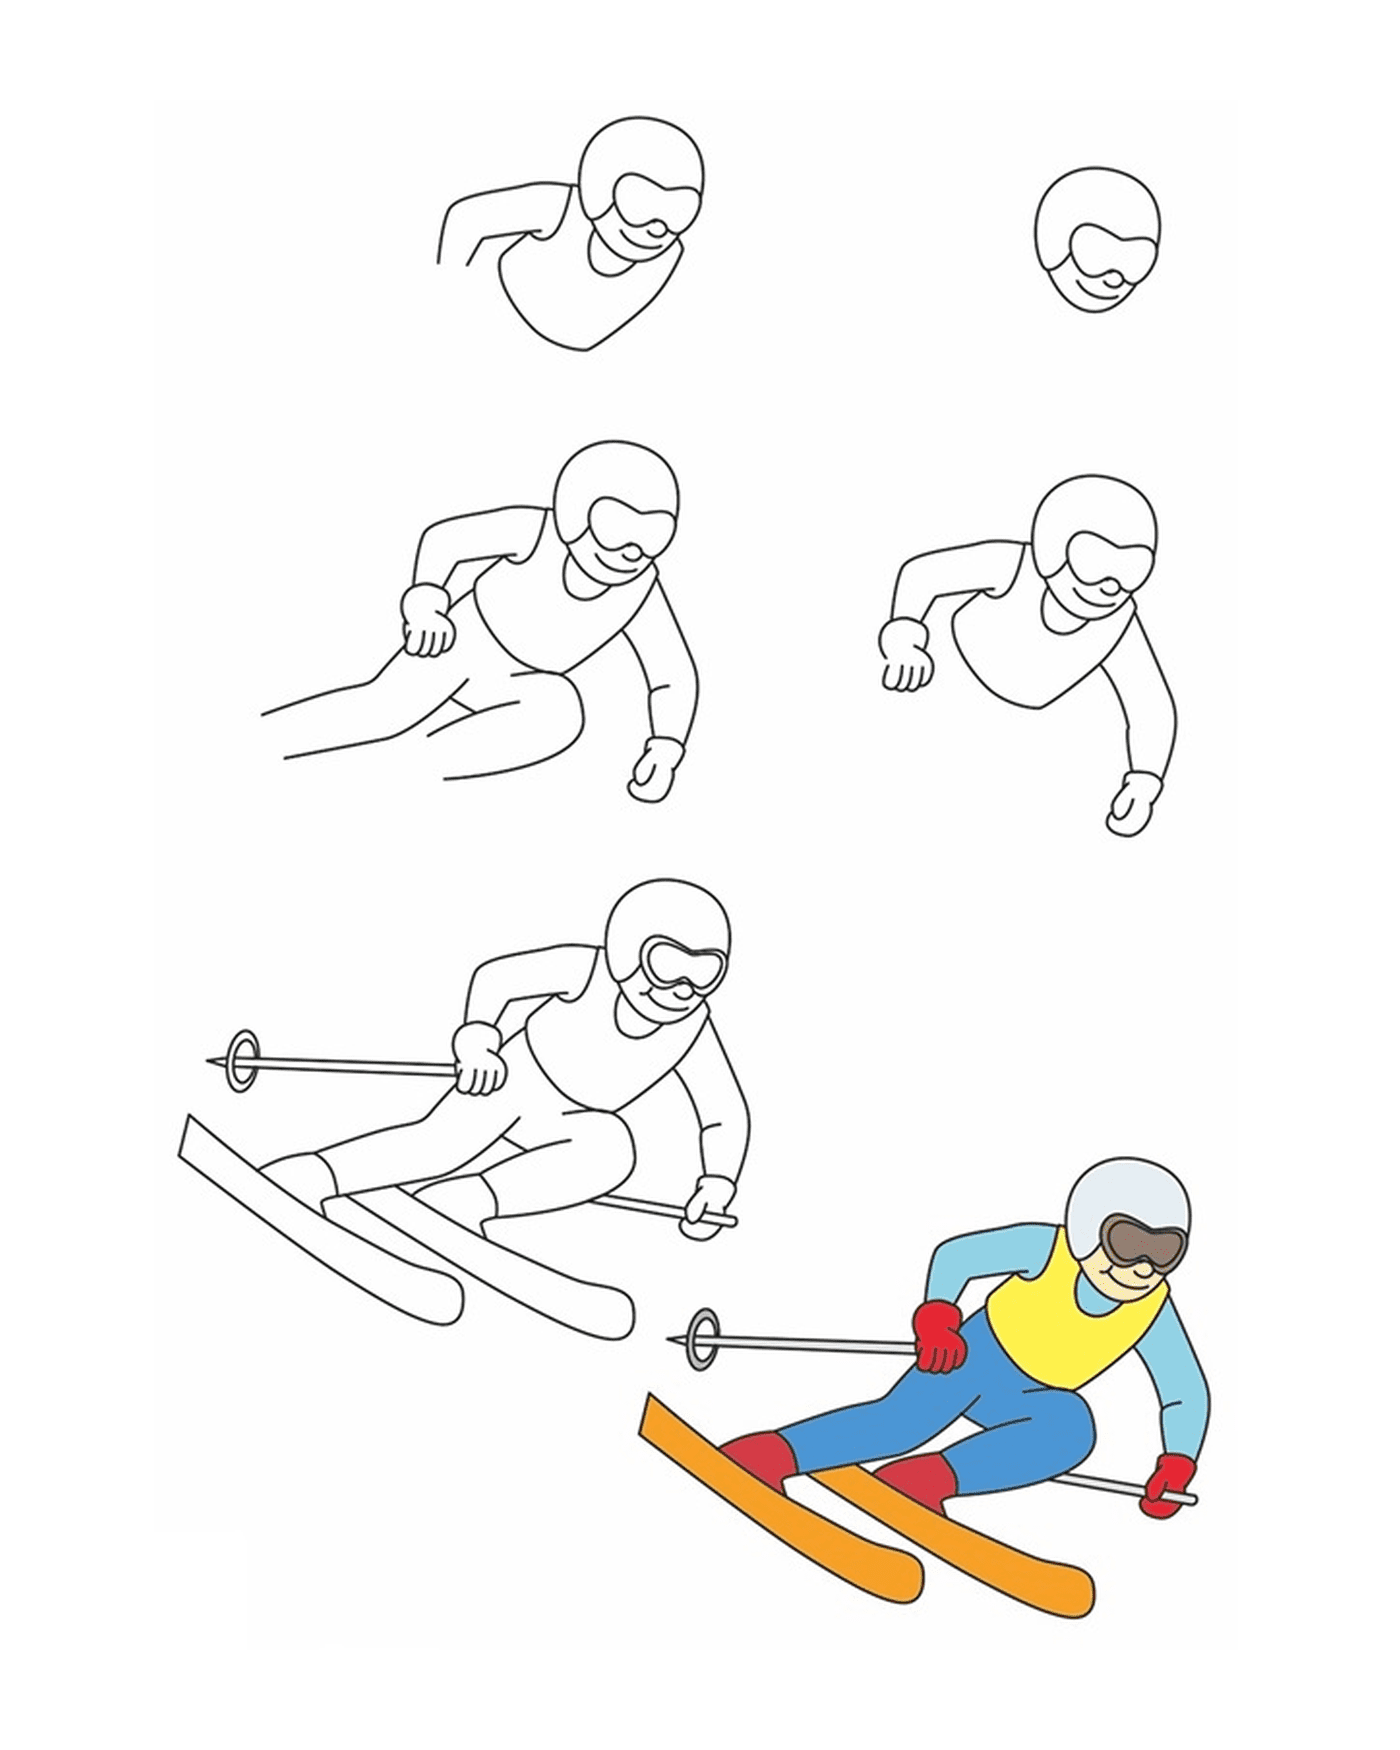  How to draw cross-country skiing 